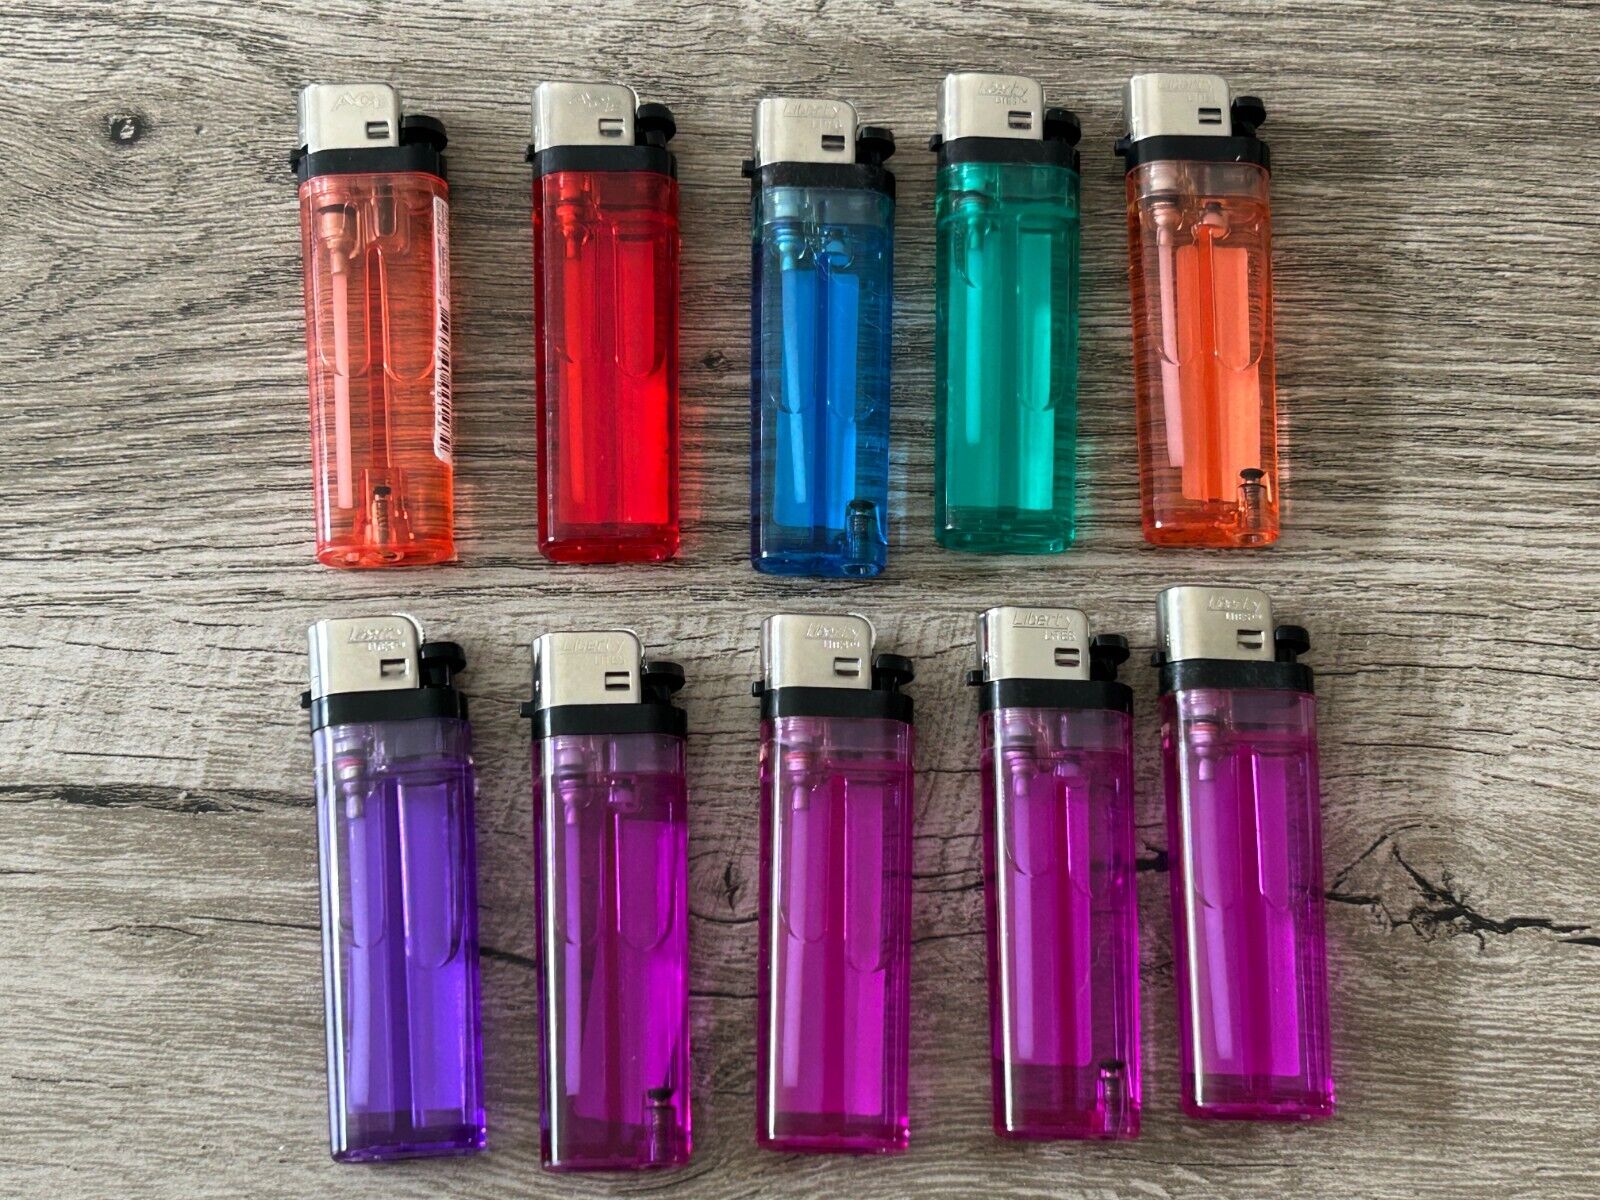 Lot of 10 Brand NEW Disposable Lighters Spark Wheel Full size ACE Liberty